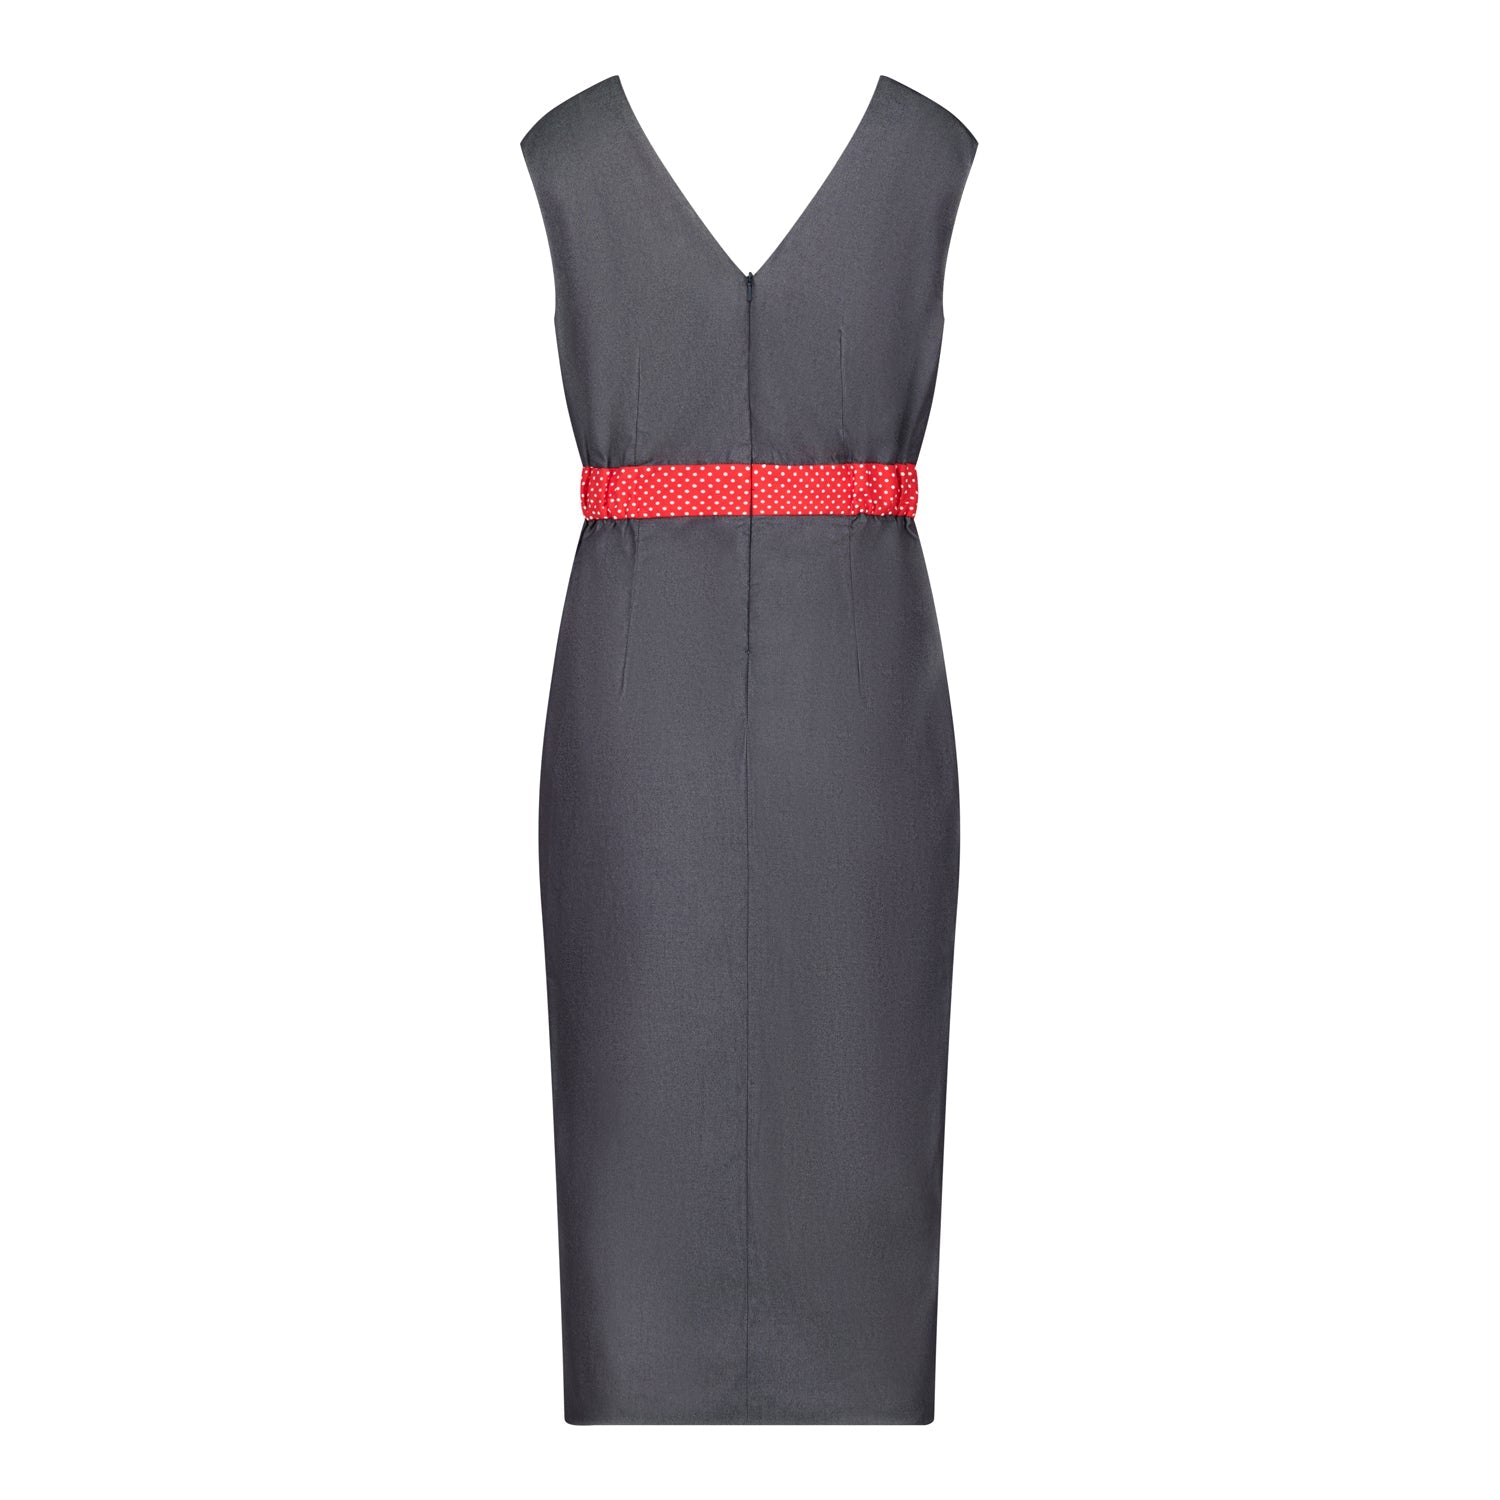 Denim Illusion wrap dress with Red Pin Spot contrast fabric, back view